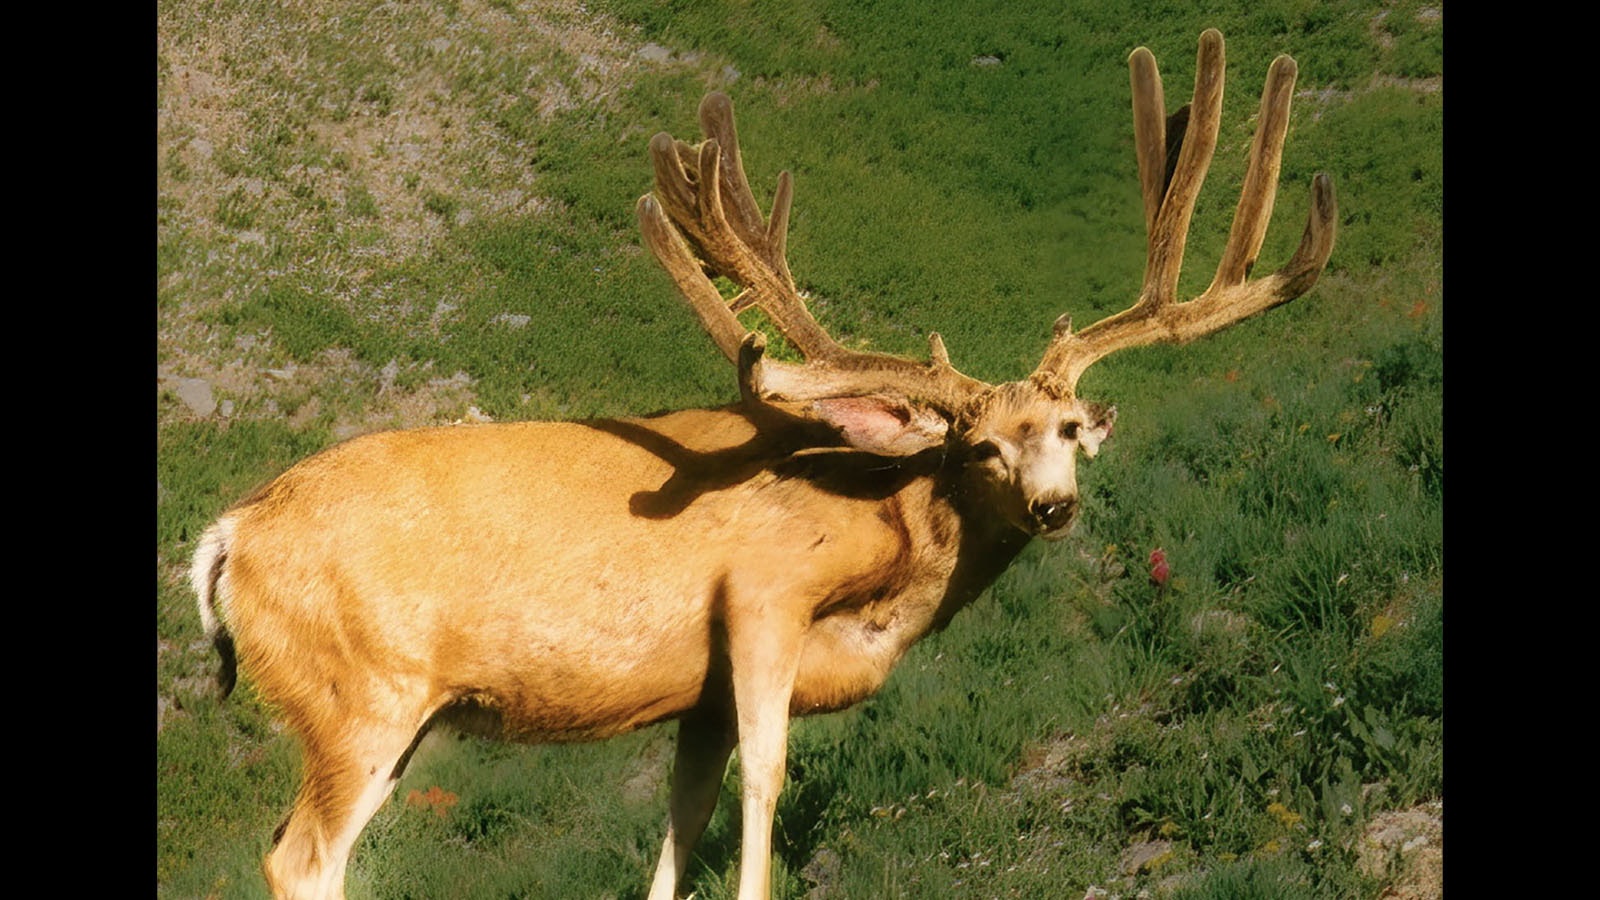 This photograph of a mule deer dubbed “Popeye” was taken in the Wyoming high country in 1996 and shows just what a monster of a buck he was. Popeye, along with the huge 1990s Wyoming bucks “Morty” and “Goliath” remain legends to this day.